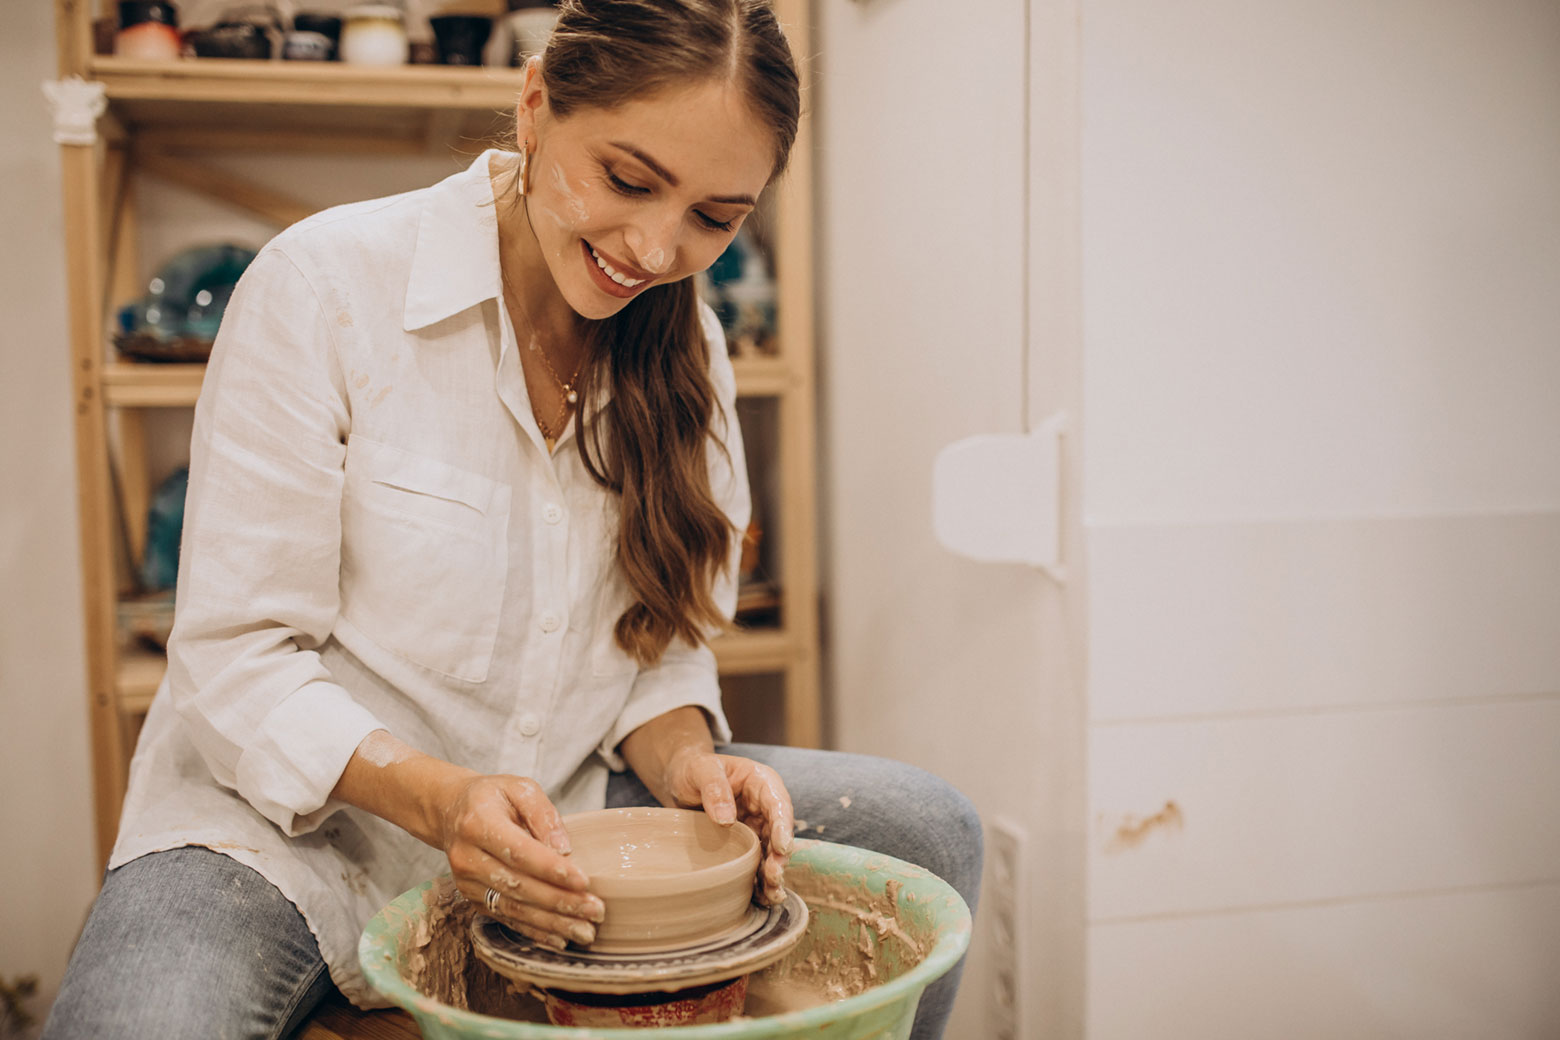 A member of the crafts community making pottery.